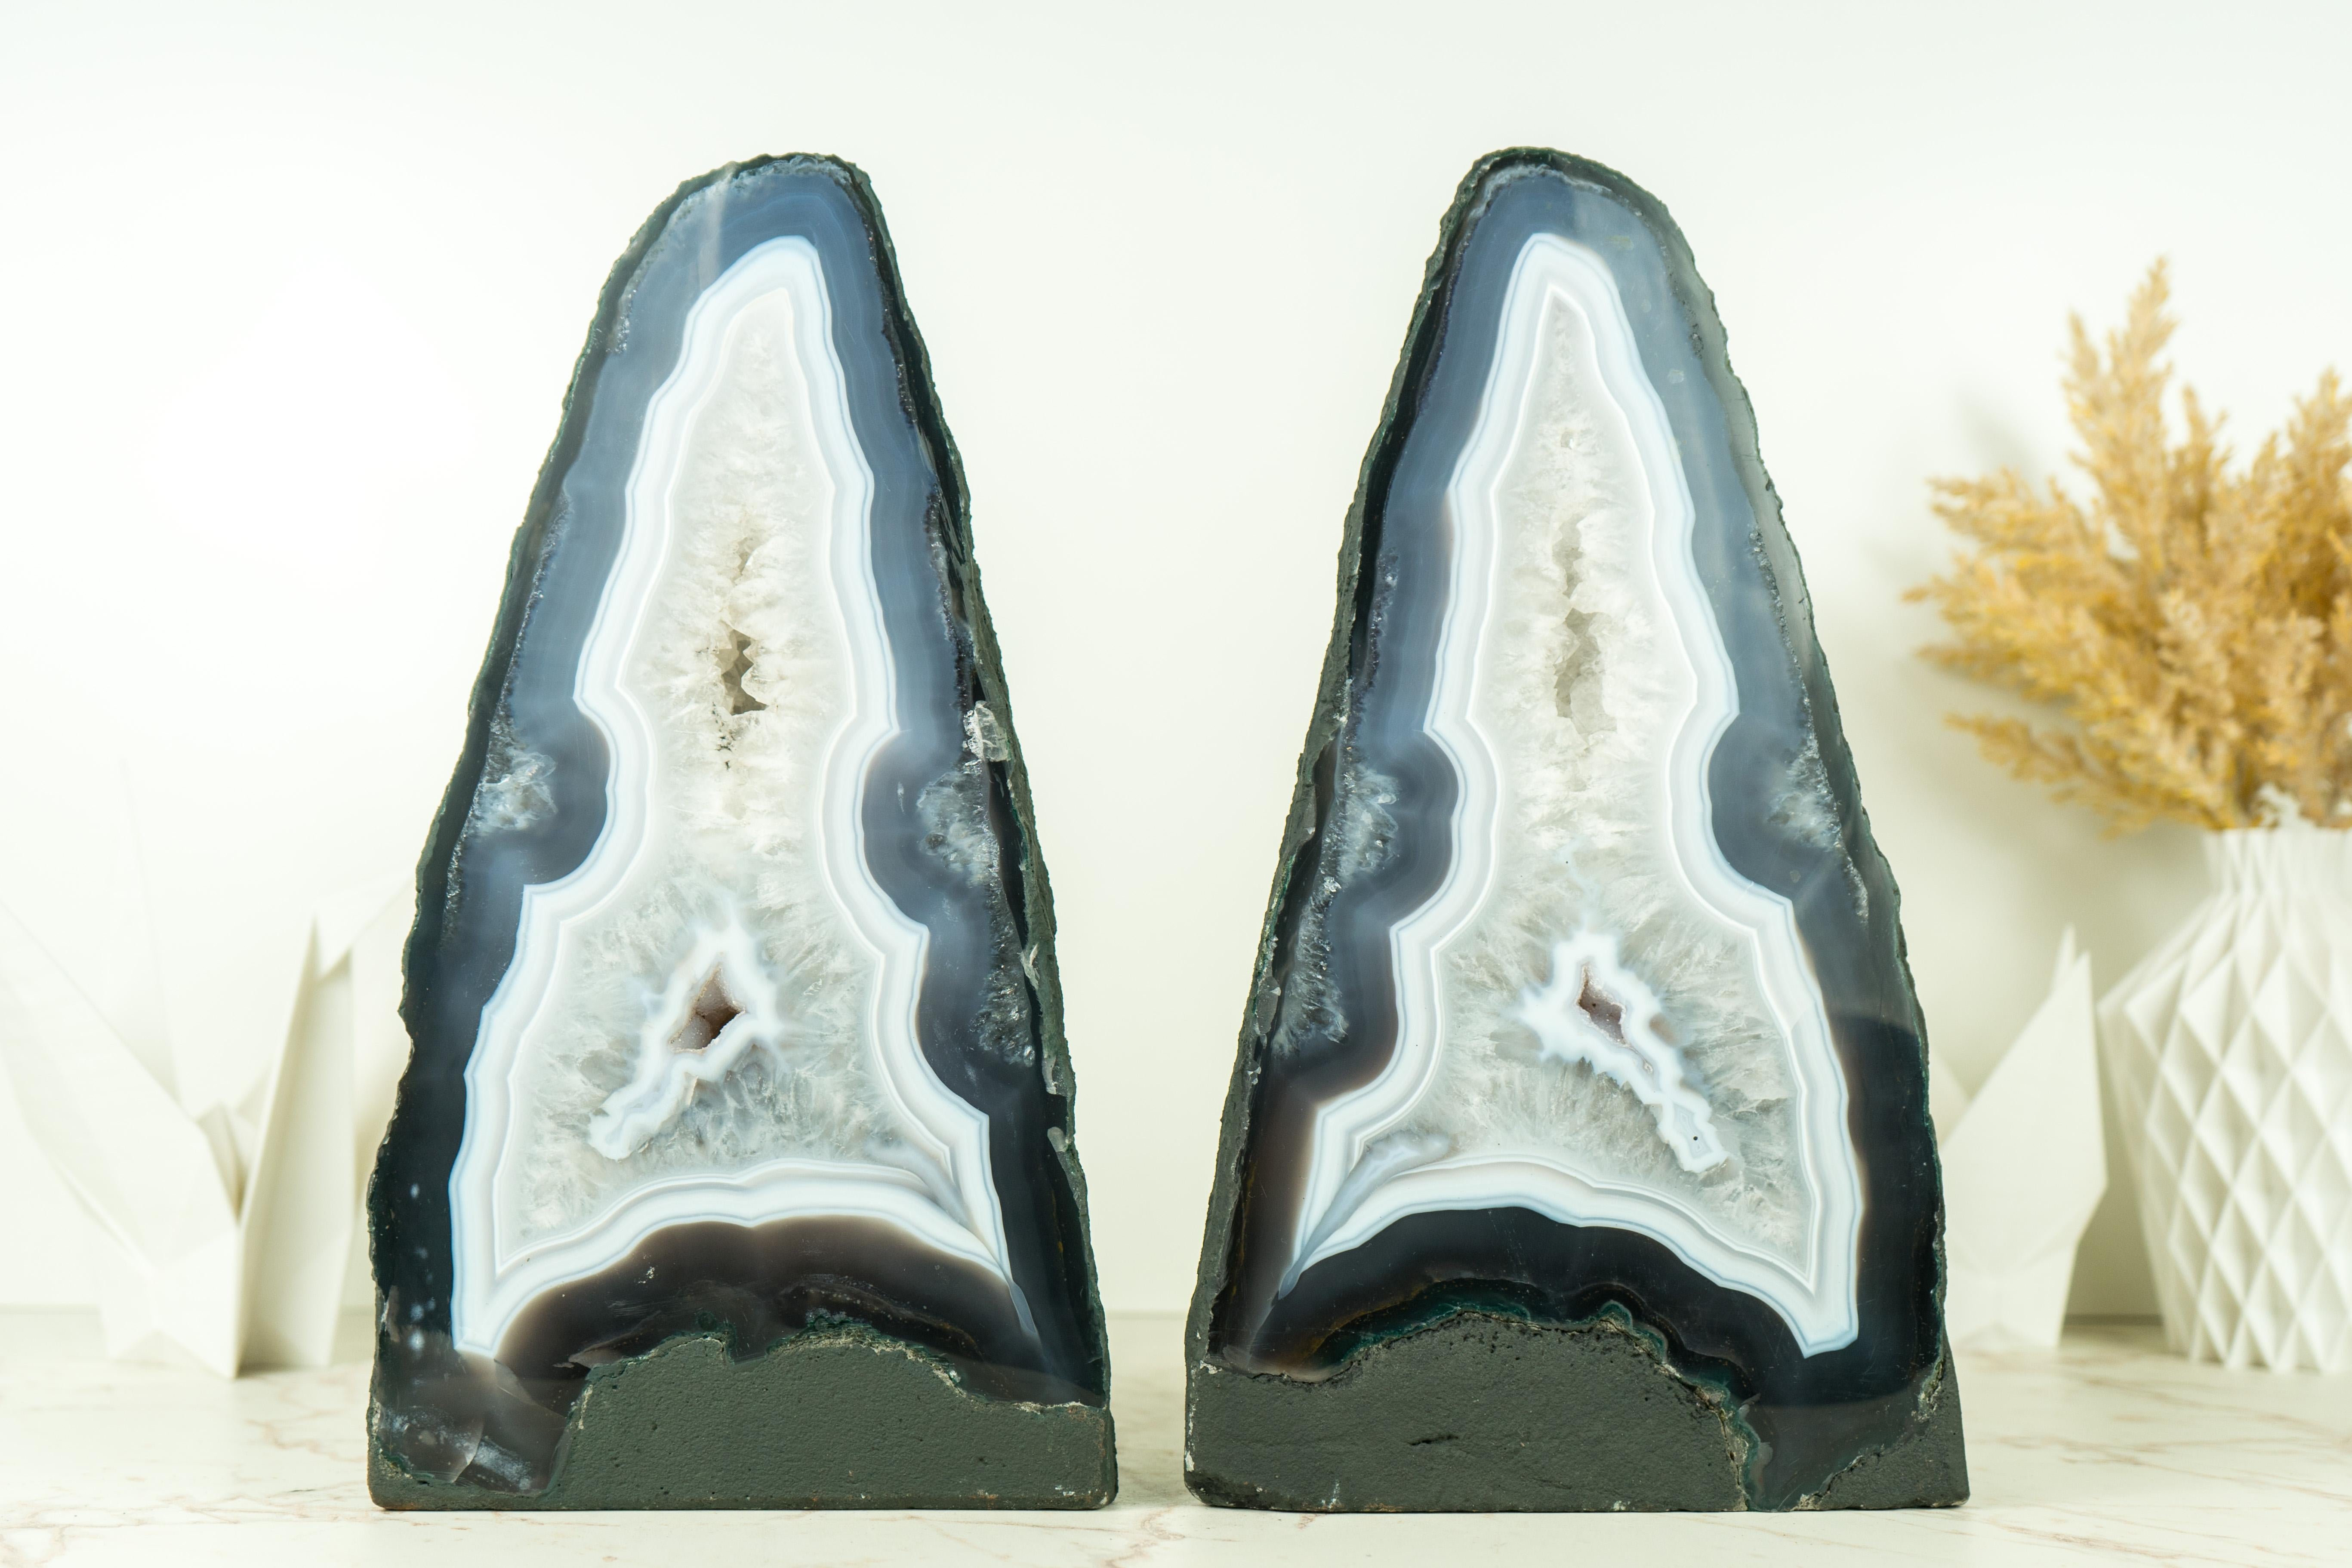 A pair of gorgeous, intact agate with blue and white laces, this pair of agate geodes is considered to be of super-extra quality due to its beauty, formation, and the aesthetical agate bands that surround both geodes. Outstanding specimens, these